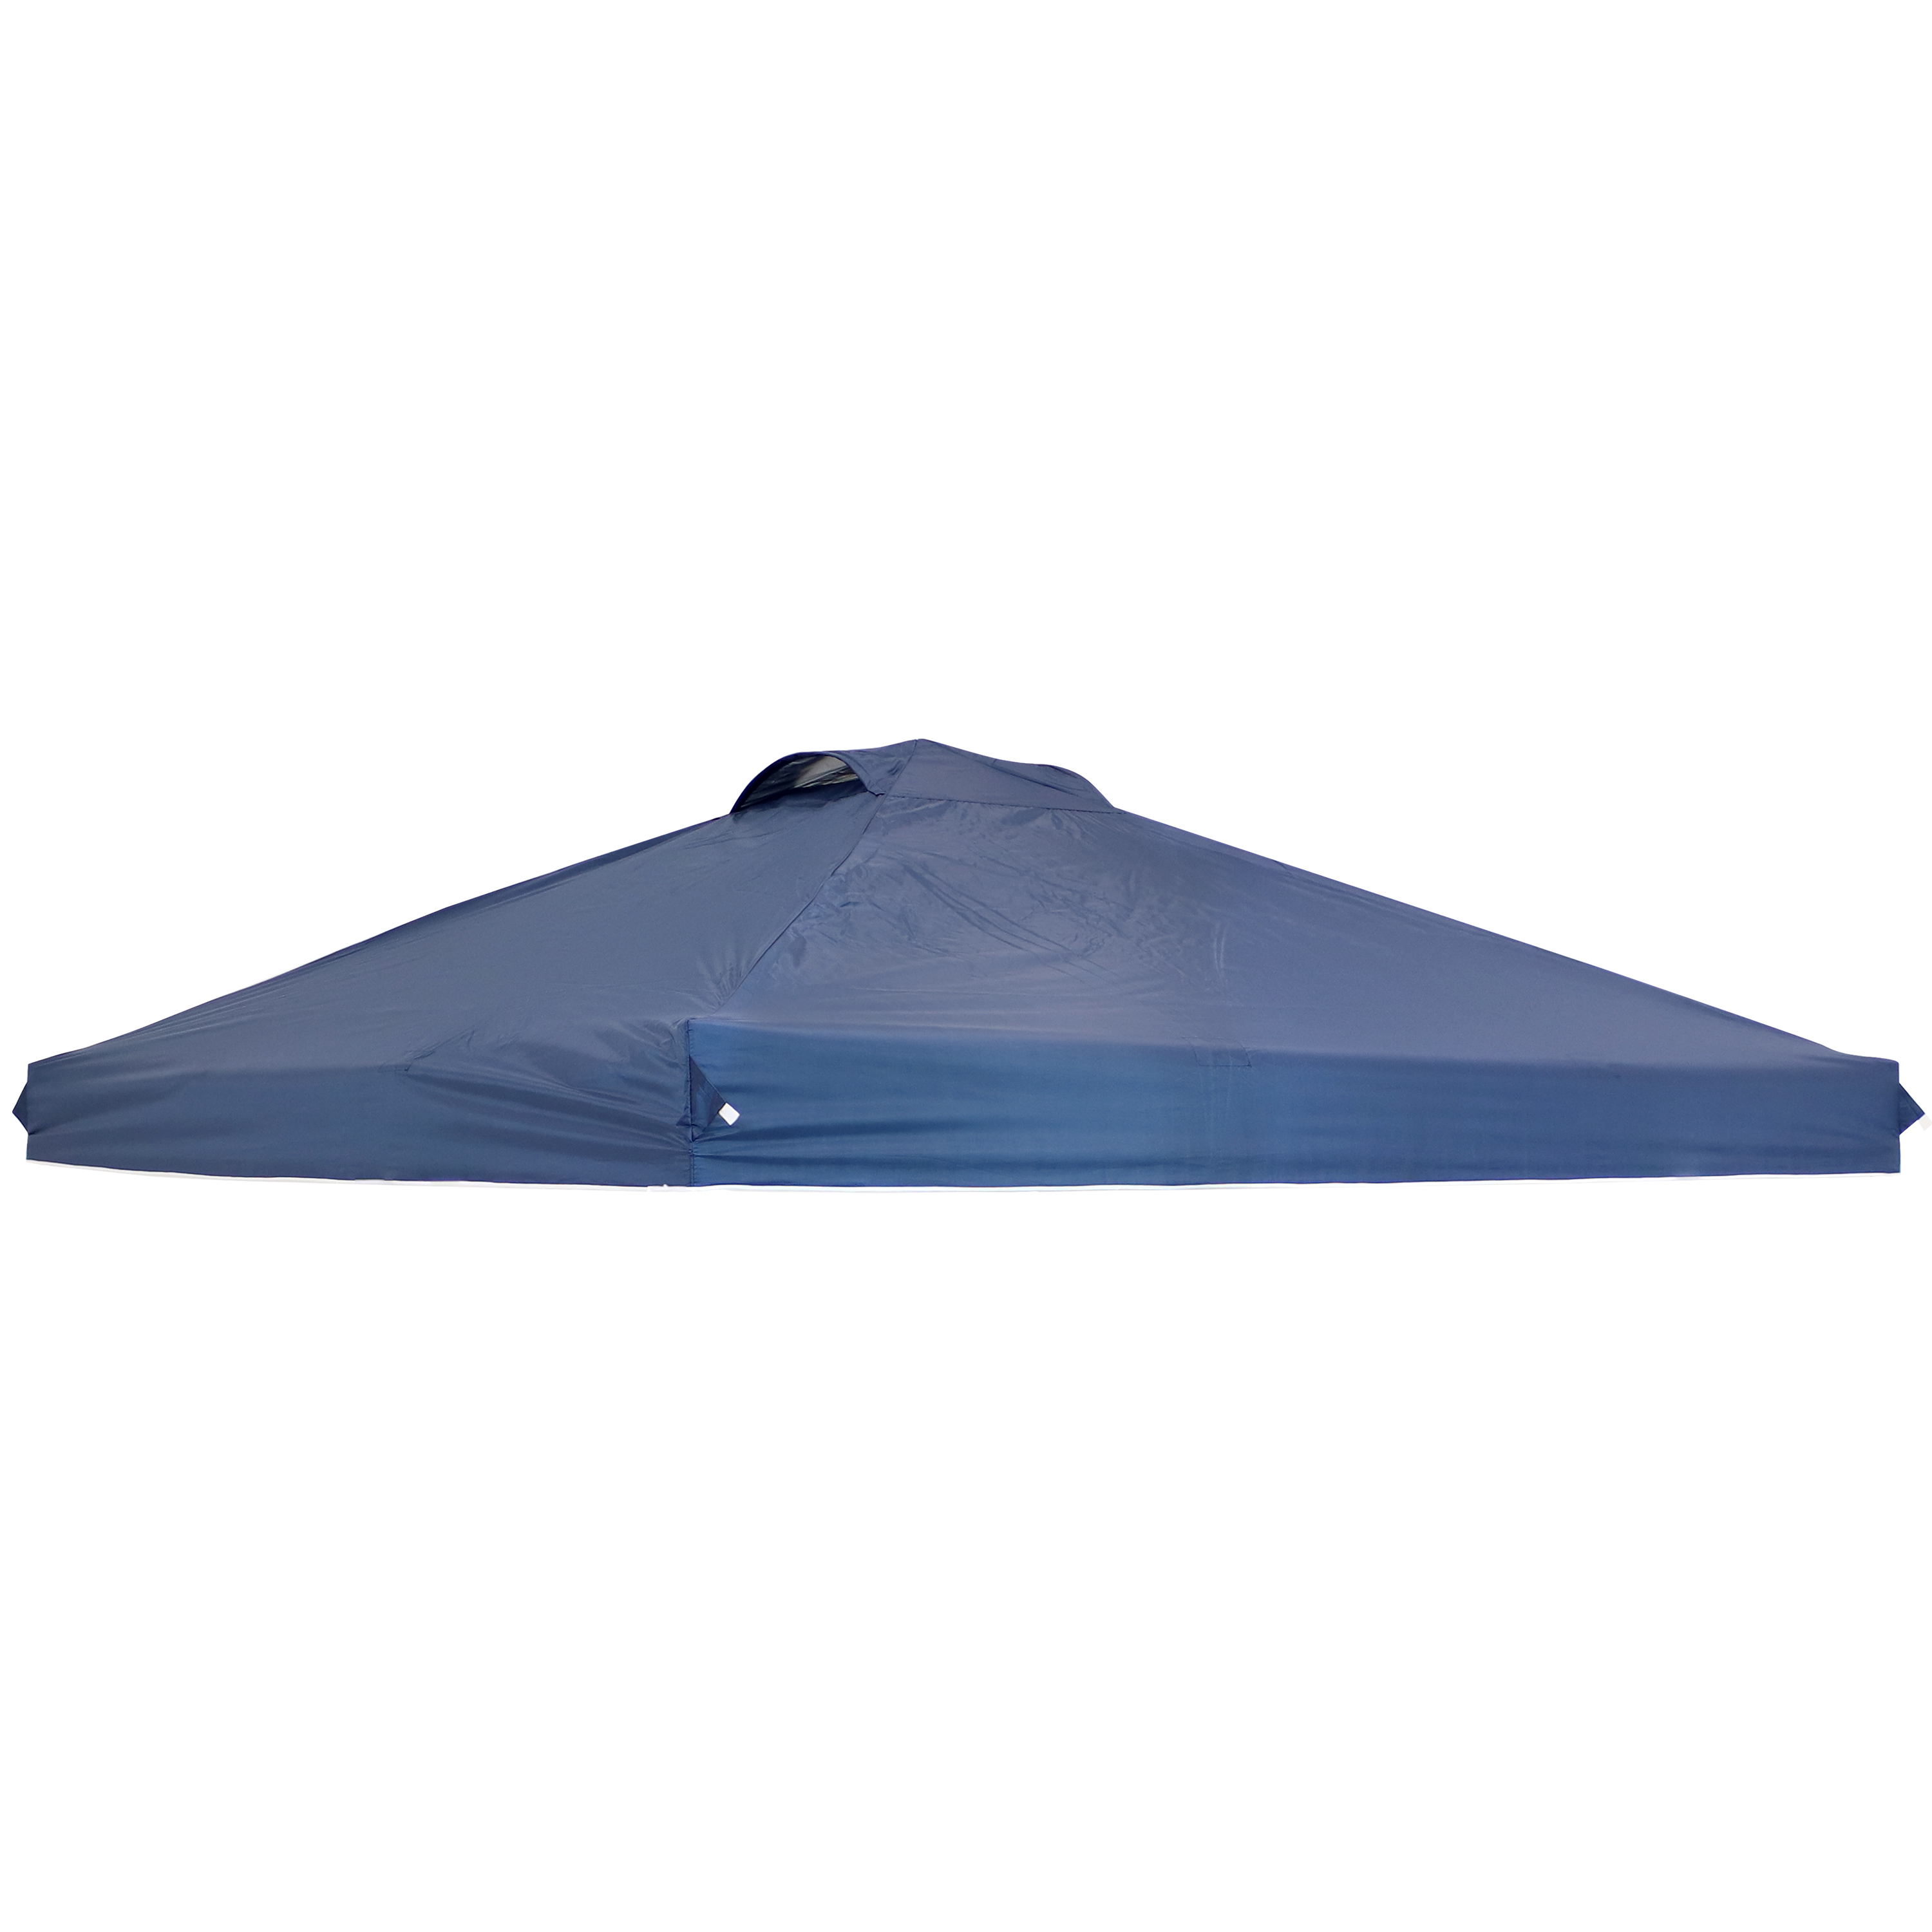 10 x 10 ft Oxford Pop-Up Canopy Shade with Vent - Blue